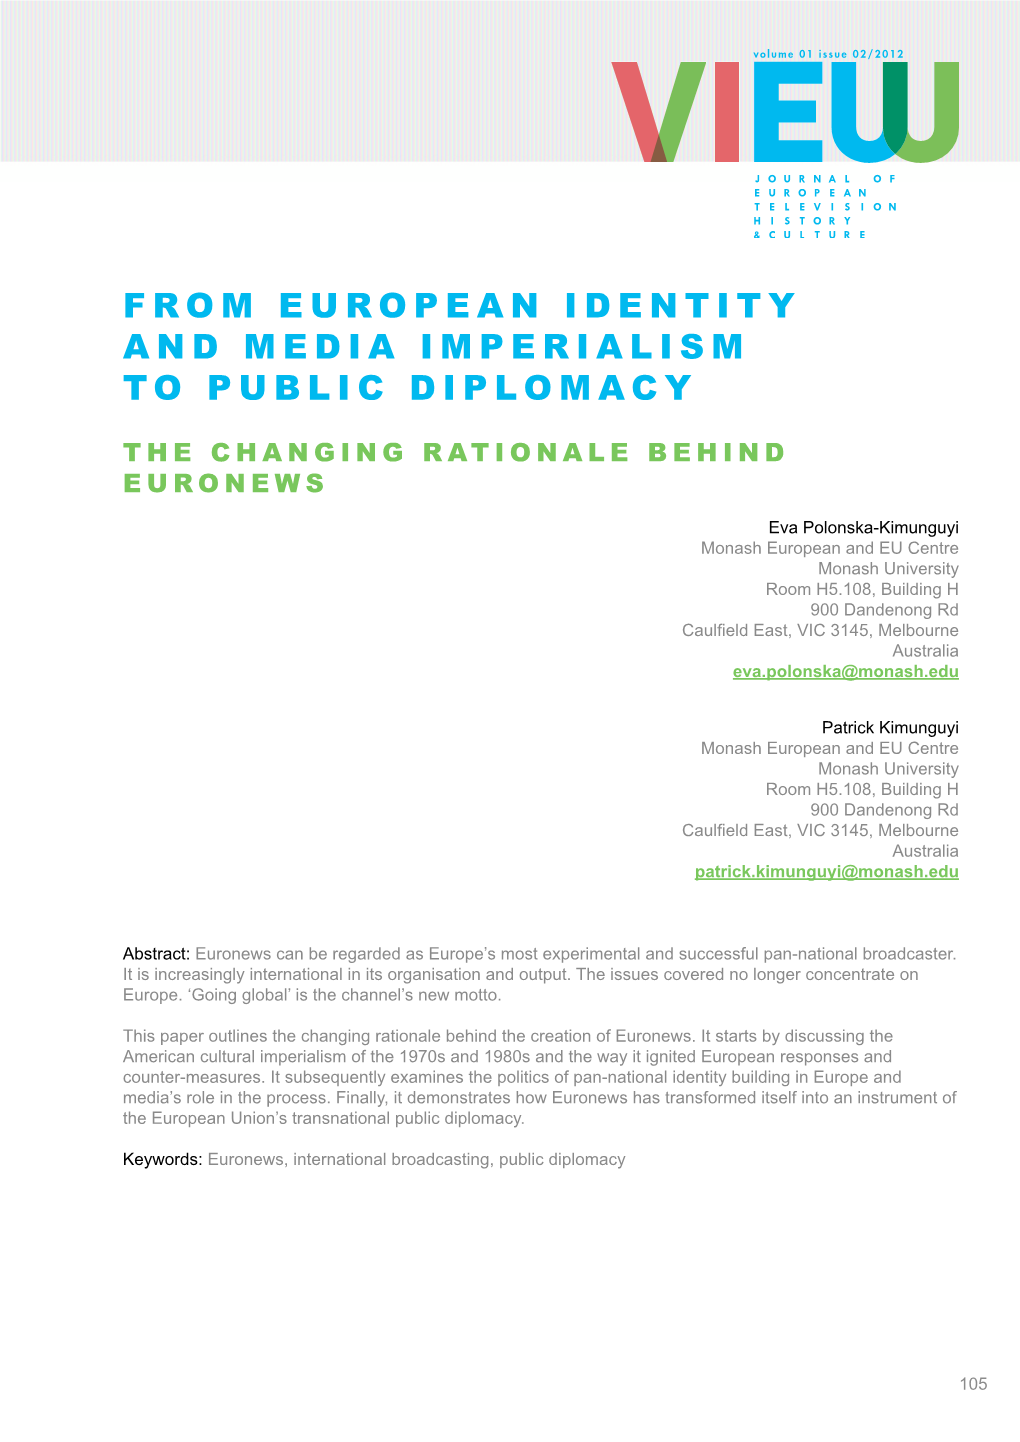 From European Identity and Media Imperialism to Public Diplomacy